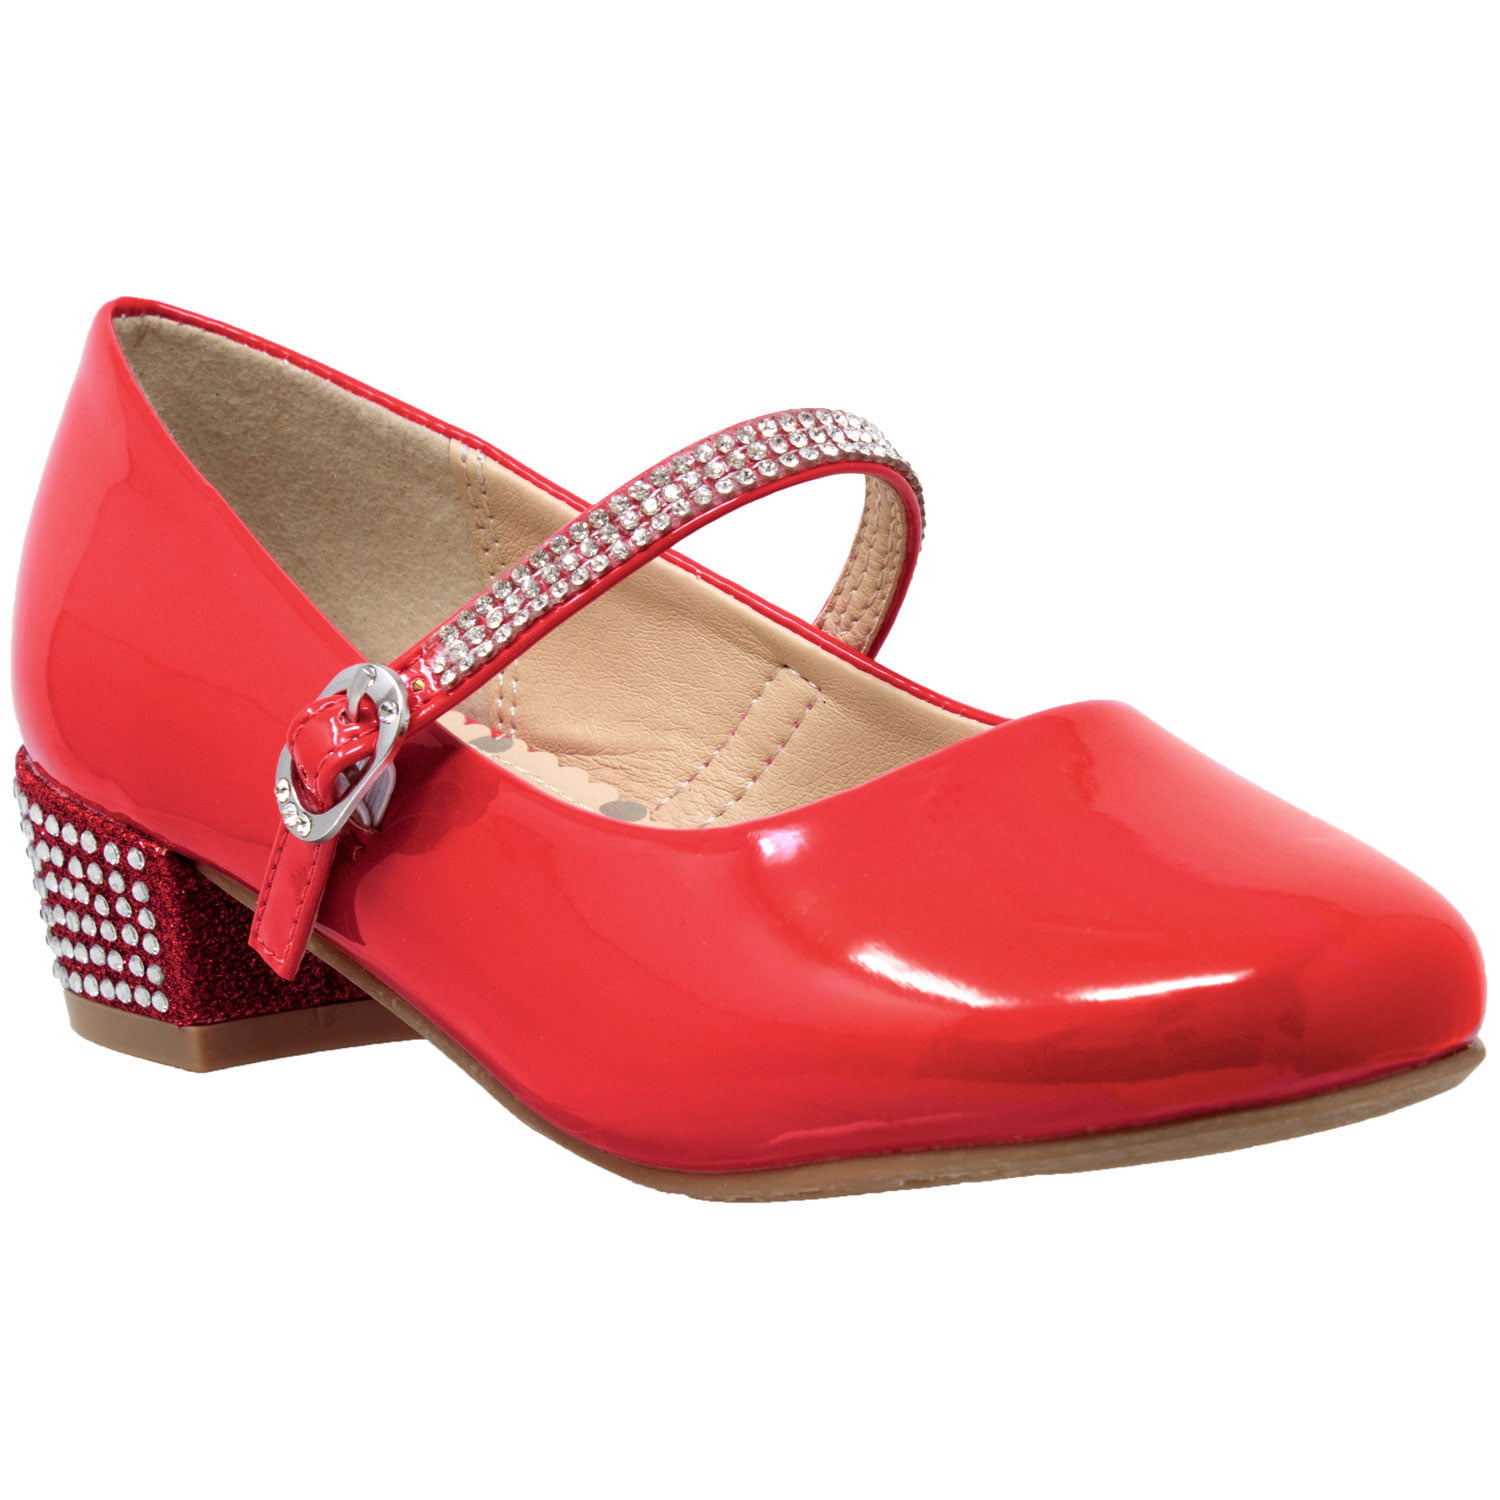 Girls Ballet Flats Mary Jane Scalloped Accent Casual Patent Shoes Red 